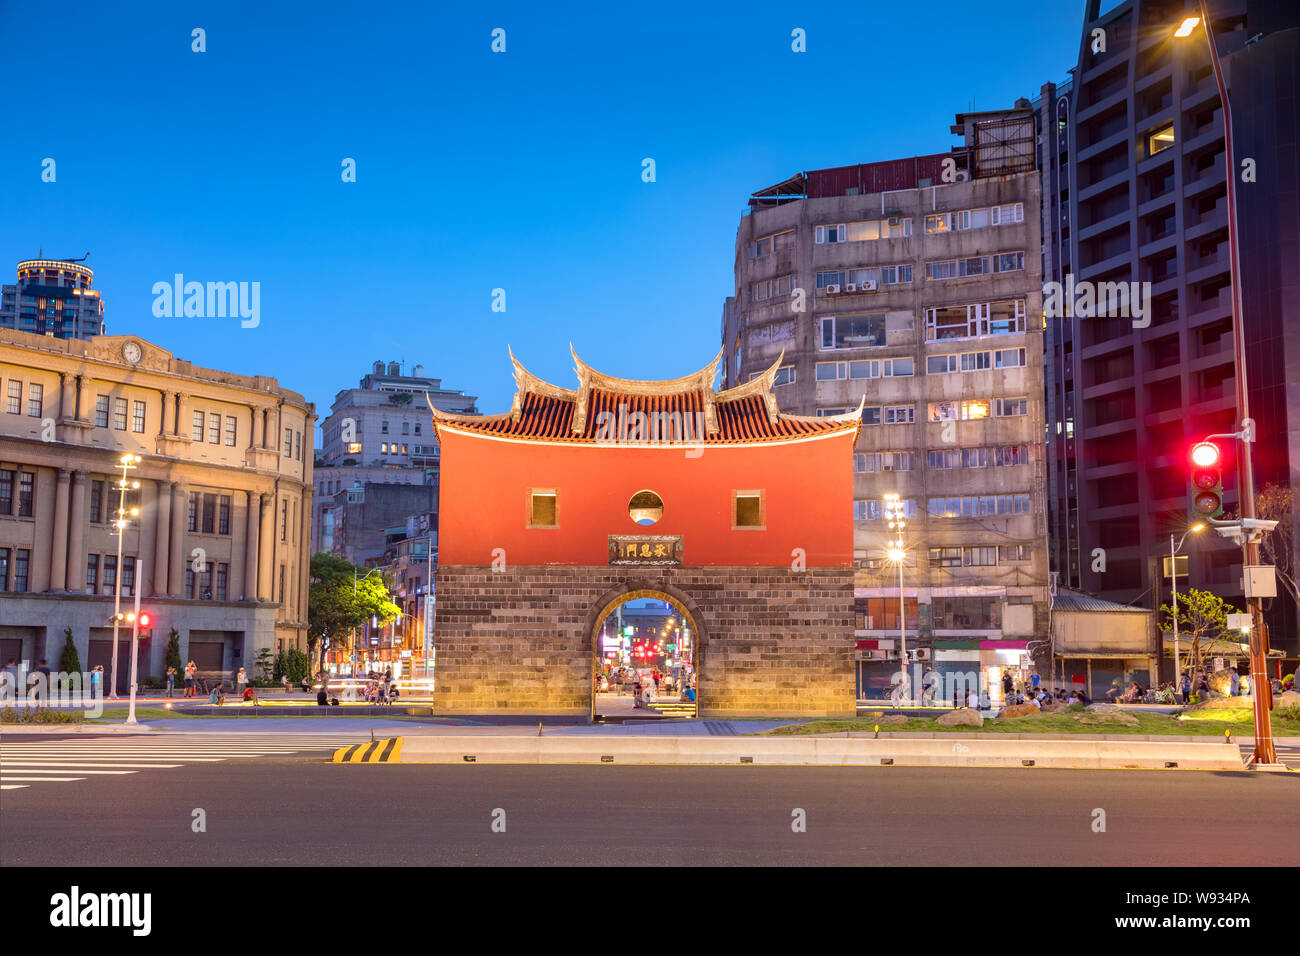 the north gate of old taipei city. the chinese words on it means 'cheng en gate', the name of the gate. Stock Photo